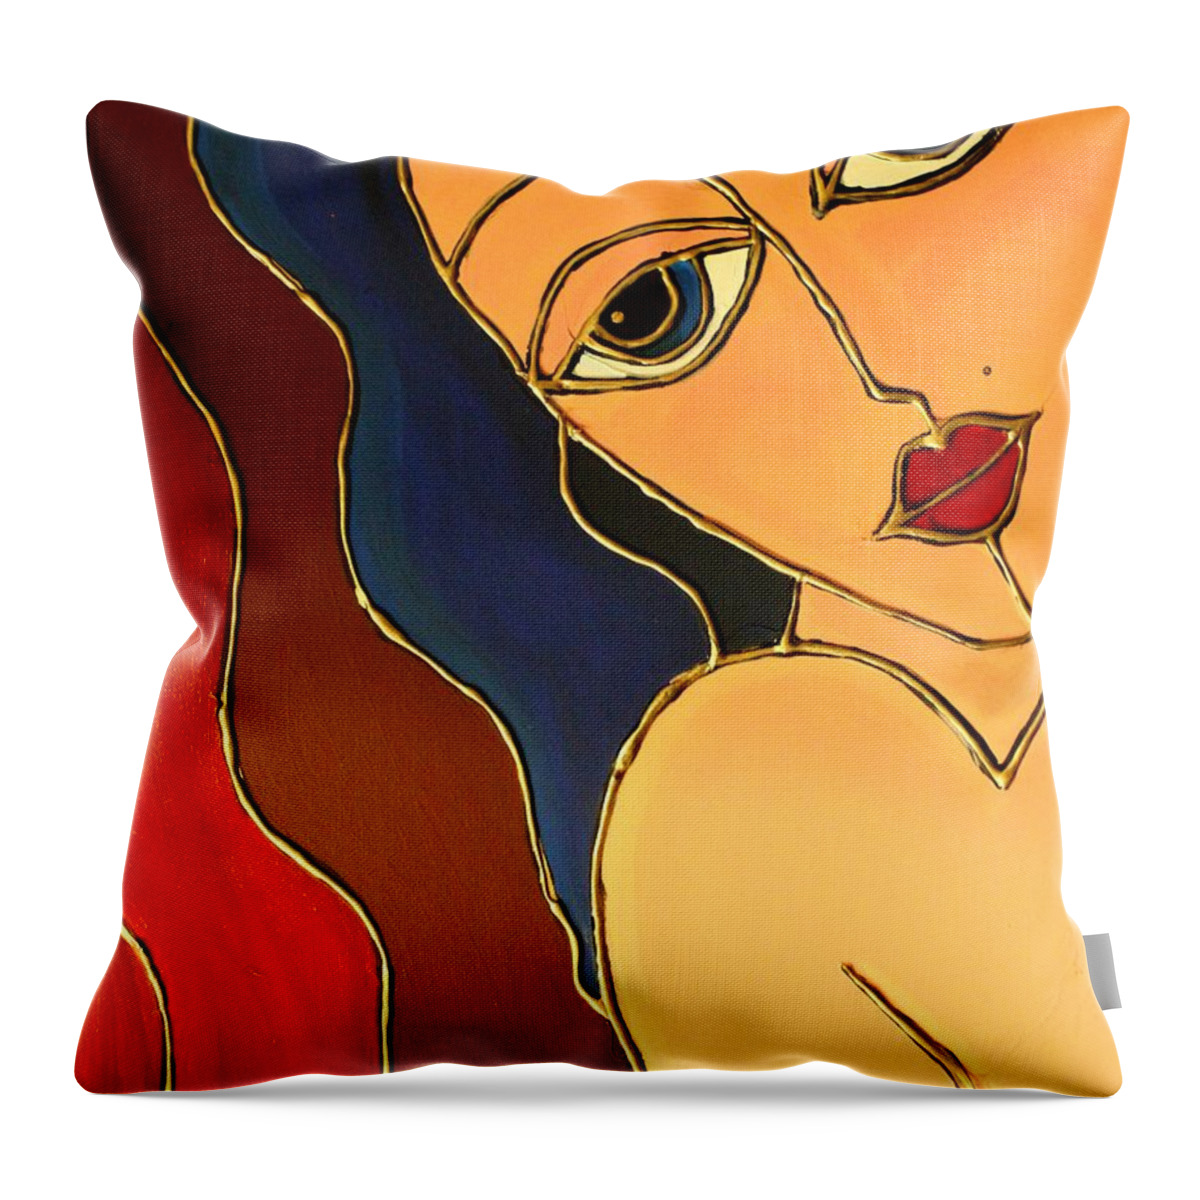 Lady Throw Pillow featuring the painting Day Dream by Cynthia Snyder